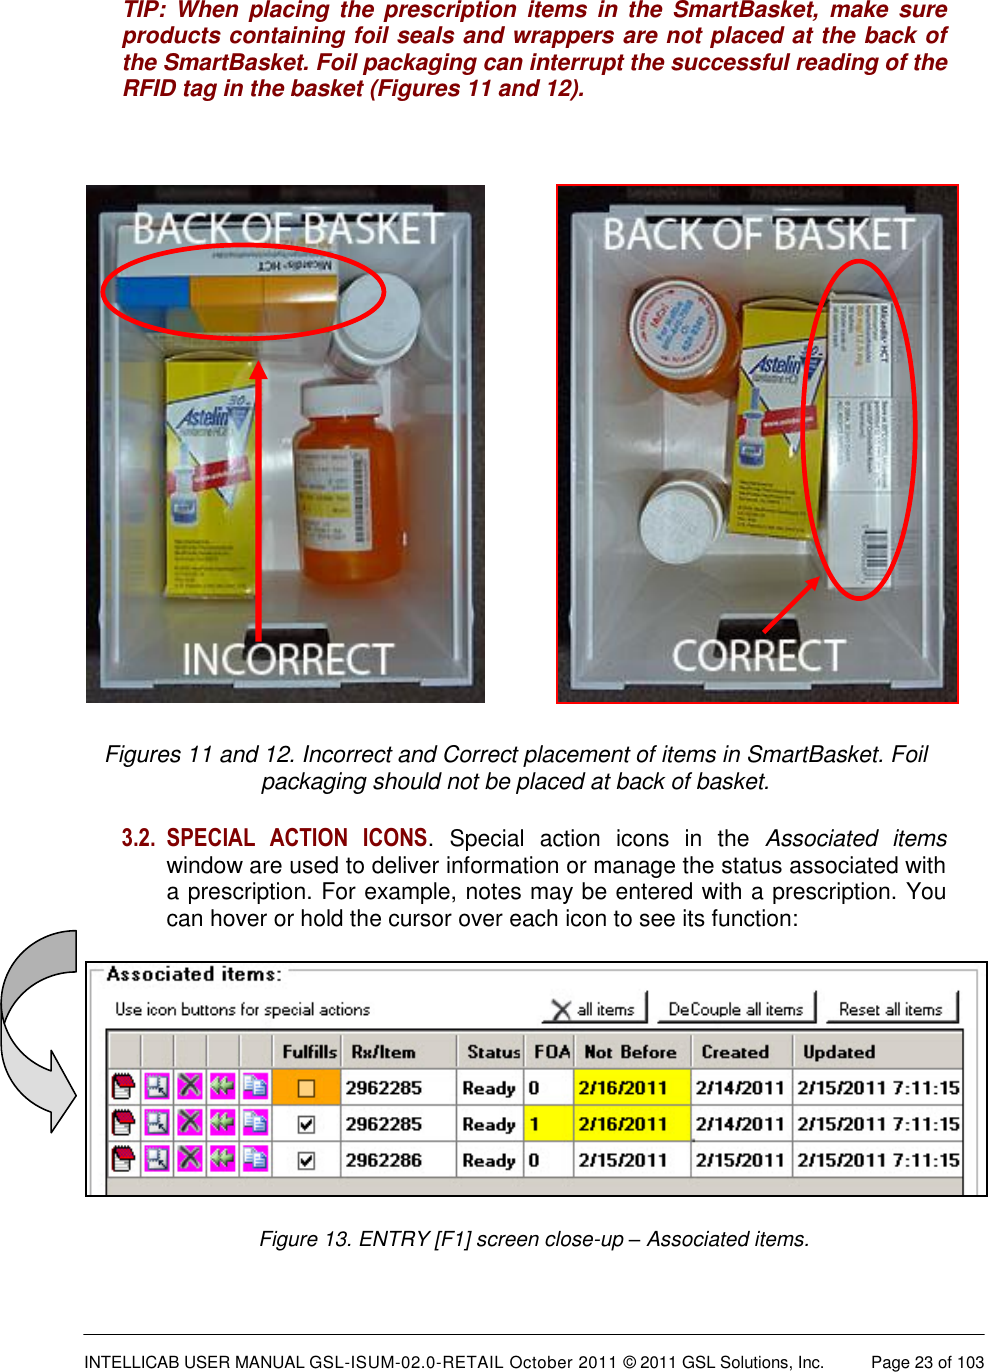  INTELLICAB USER MANUAL GSL-ISUM-02.0-RETAIL October 2011 © 2011 GSL Solutions, Inc.   Page 23 of 103   TIP:  When  placing  the  prescription items  in  the  SmartBasket,  make  sure products containing foil seals and wrappers are not placed at the back of the SmartBasket. Foil packaging can interrupt the successful reading of the RFID tag in the basket (Figures 11 and 12).            Figures 11 and 12. Incorrect and Correct placement of items in SmartBasket. Foil packaging should not be placed at back of basket. 3.2. SPECIAL  ACTION  ICONS.  Special  action  icons  in  the  Associated  items window are used to deliver information or manage the status associated with a prescription. For example, notes may be entered with a prescription. You can hover or hold the cursor over each icon to see its function:  Figure 13. ENTRY [F1] screen close-up – Associated items. 